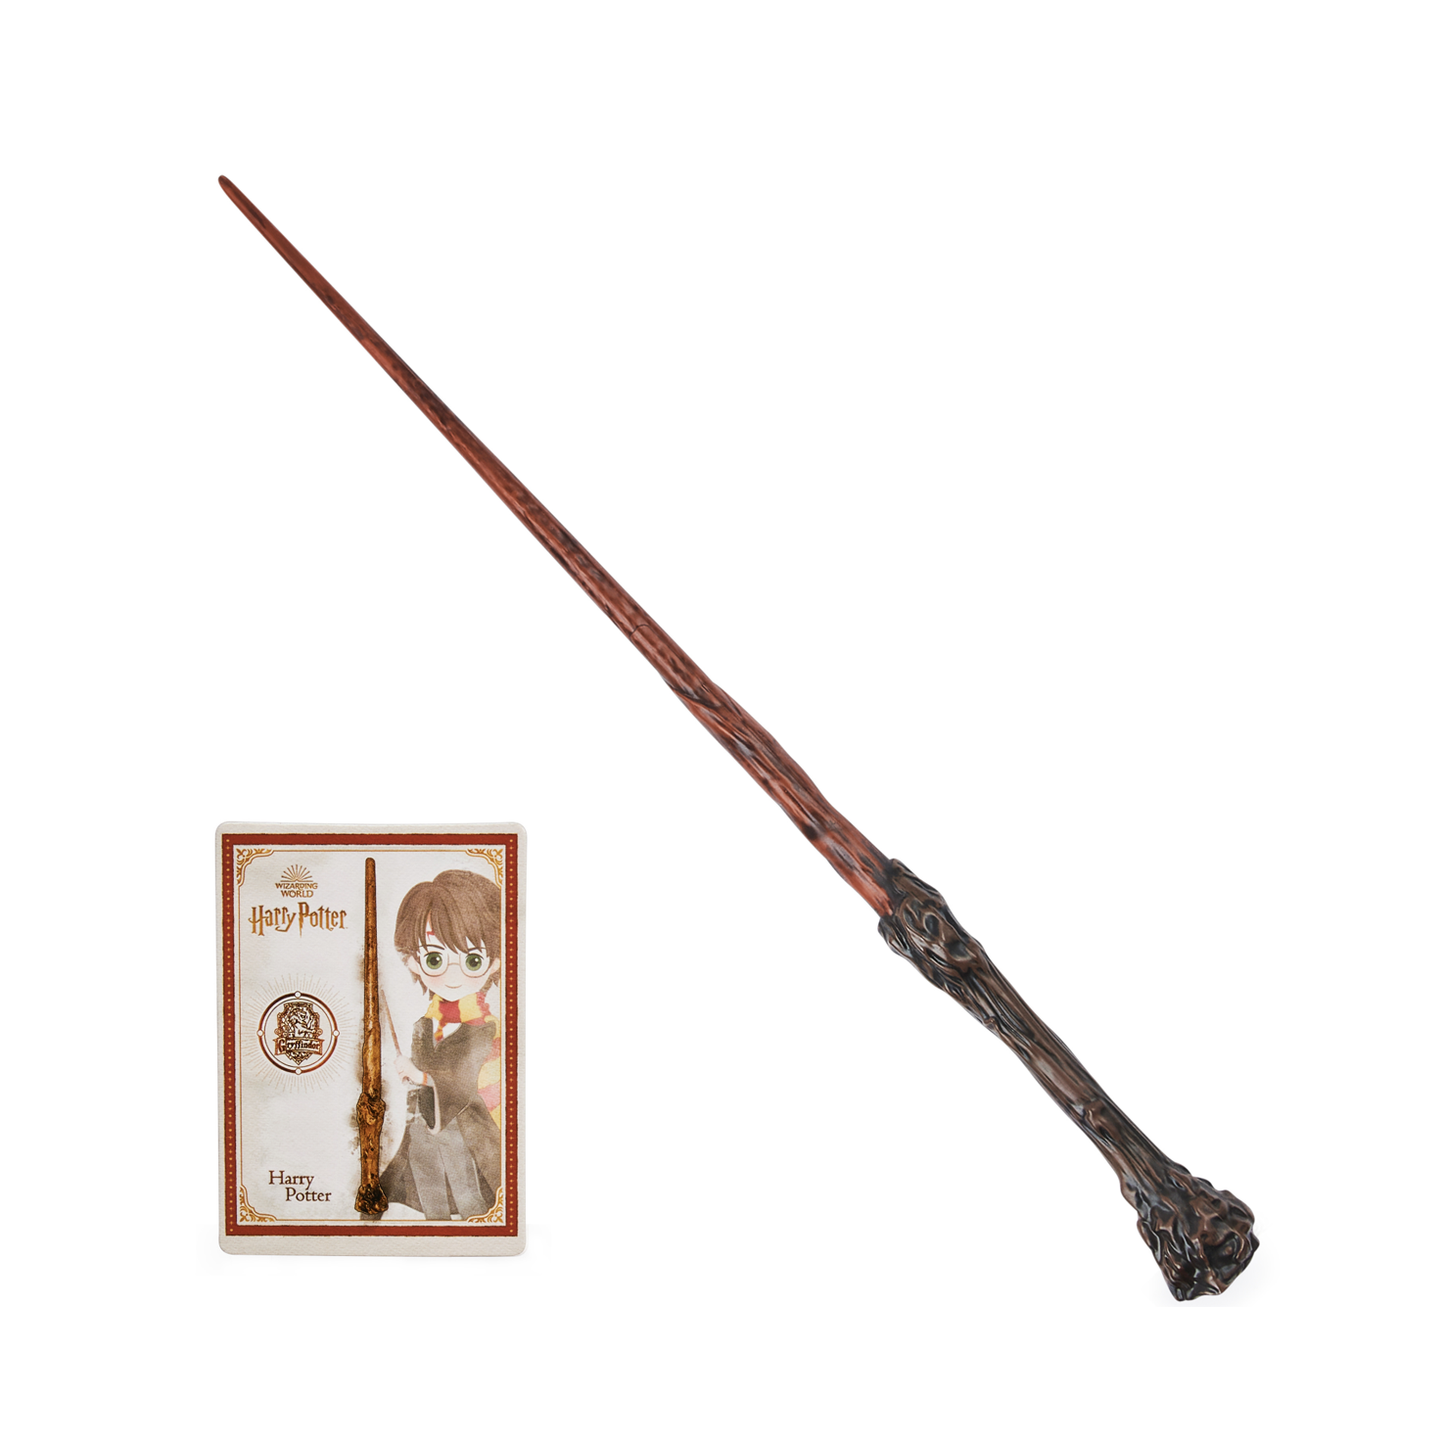 Harry Potter™ Spinmaster Wand